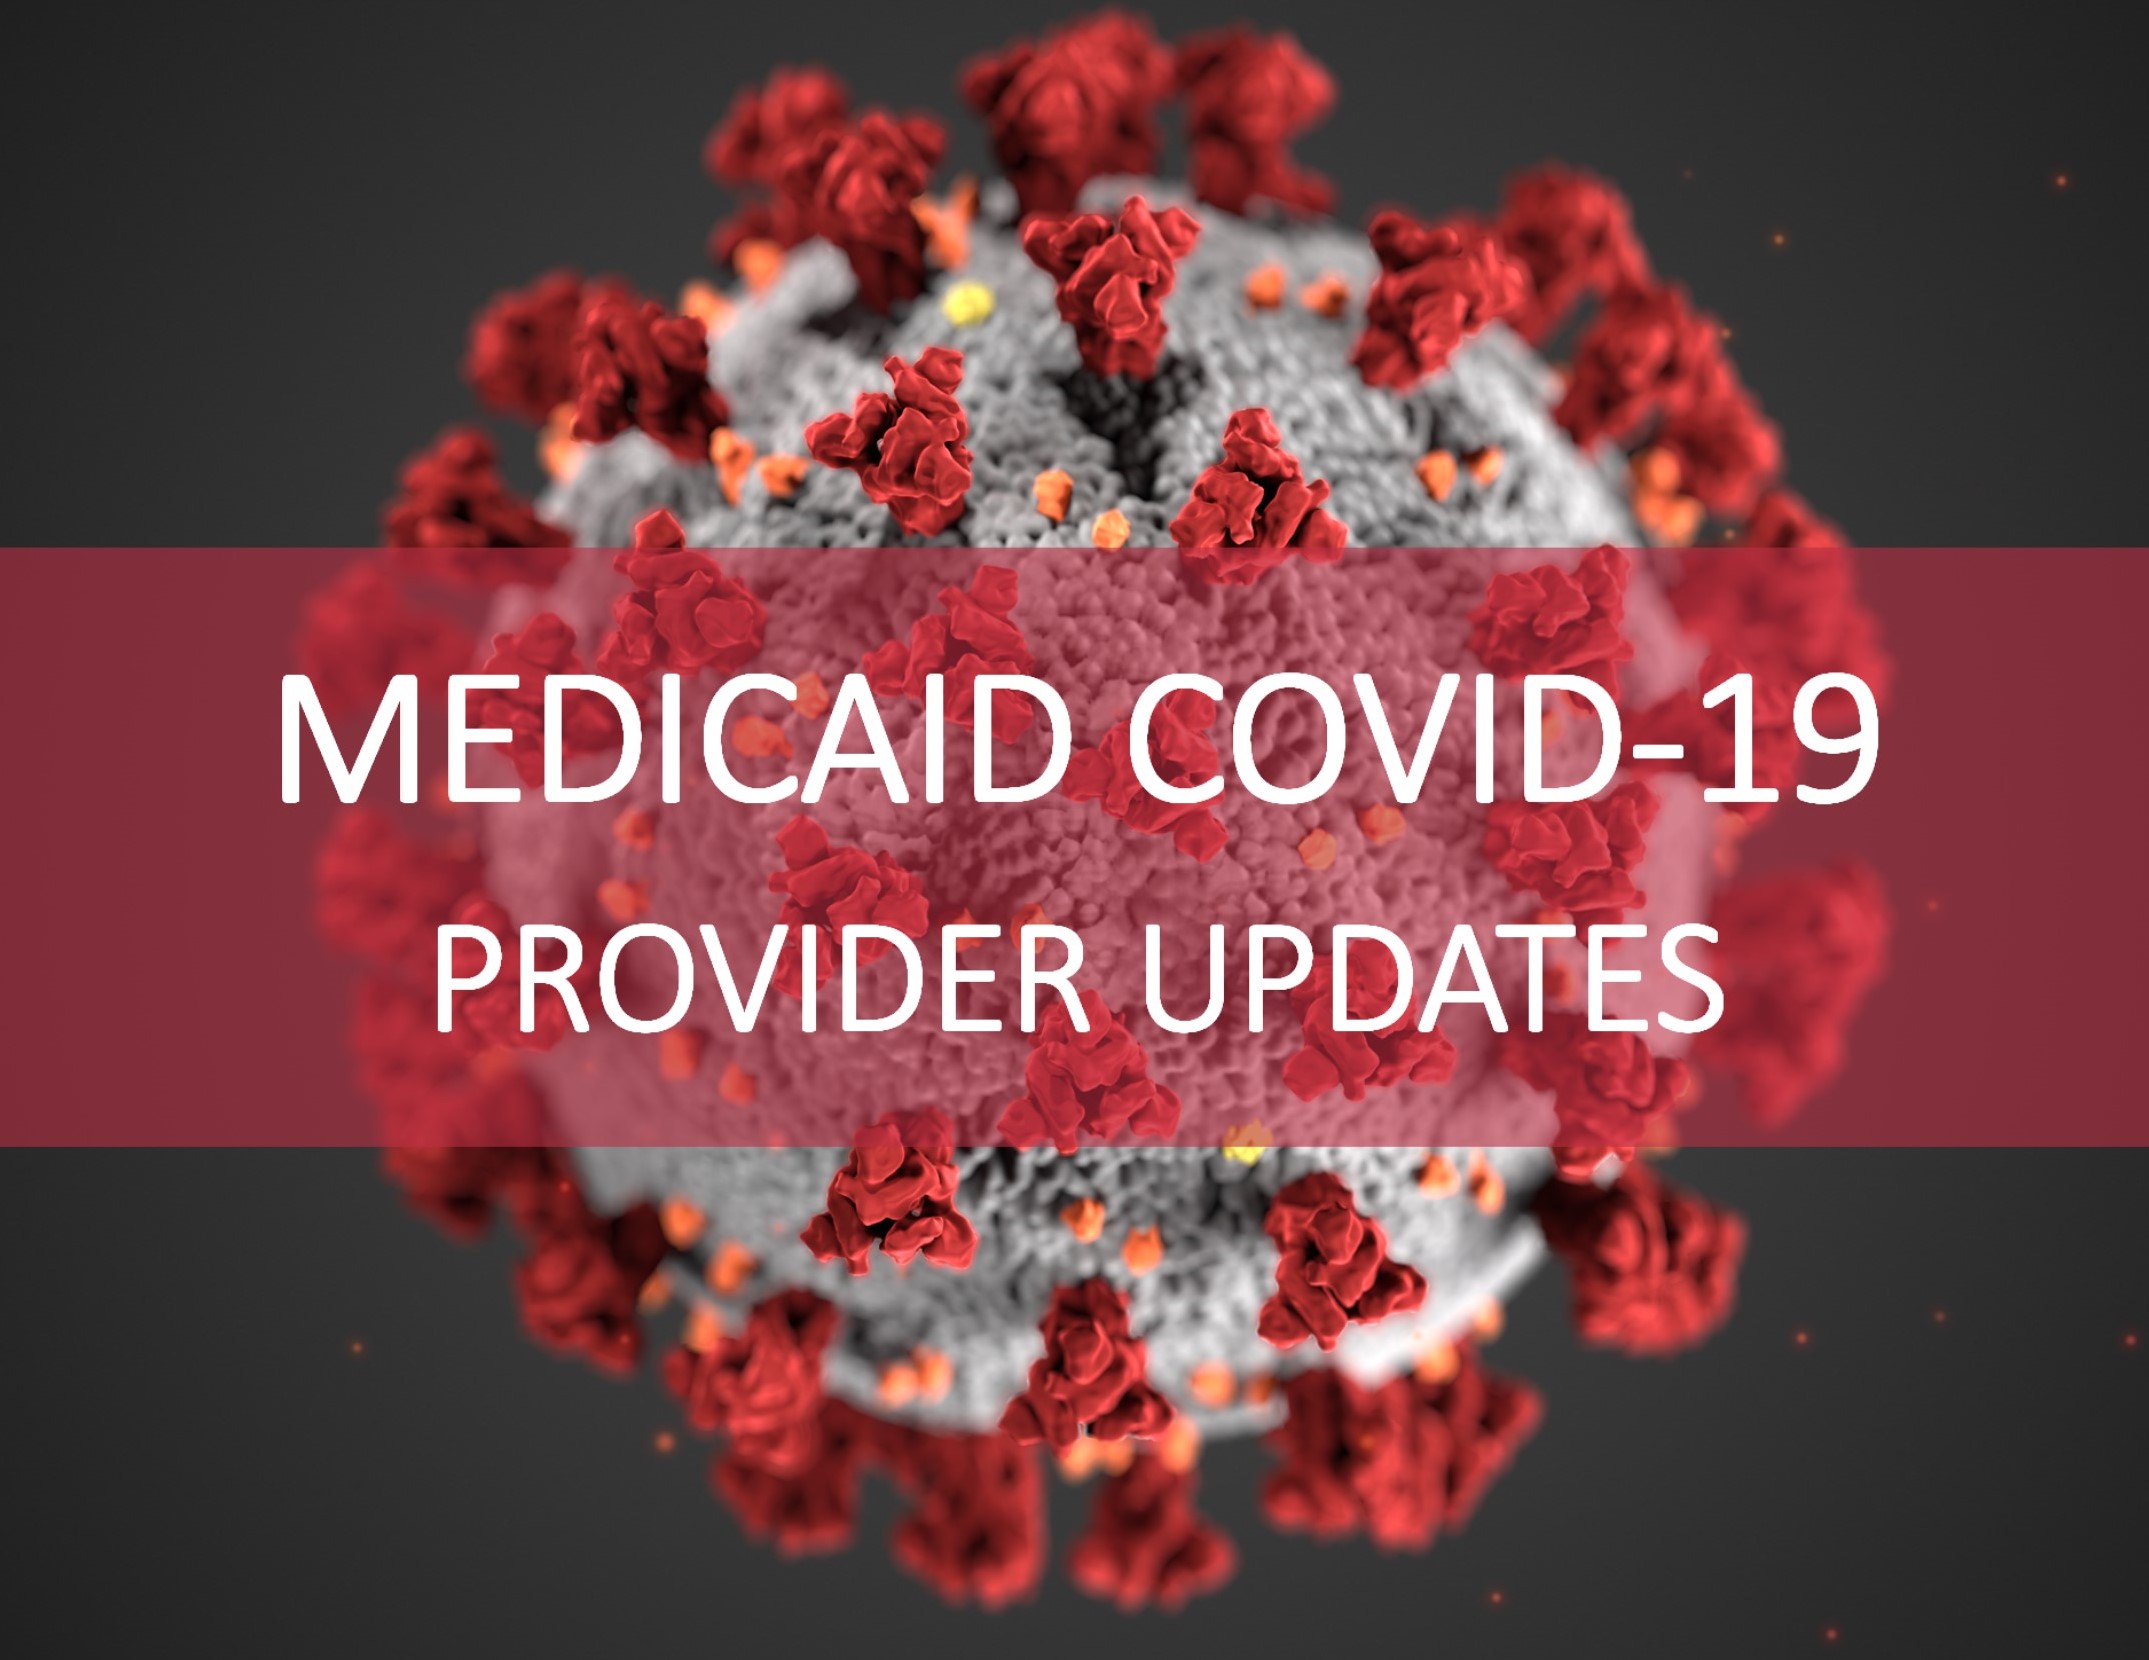 Medicaid COVID-19 Provider Updates crop for home page.jpg